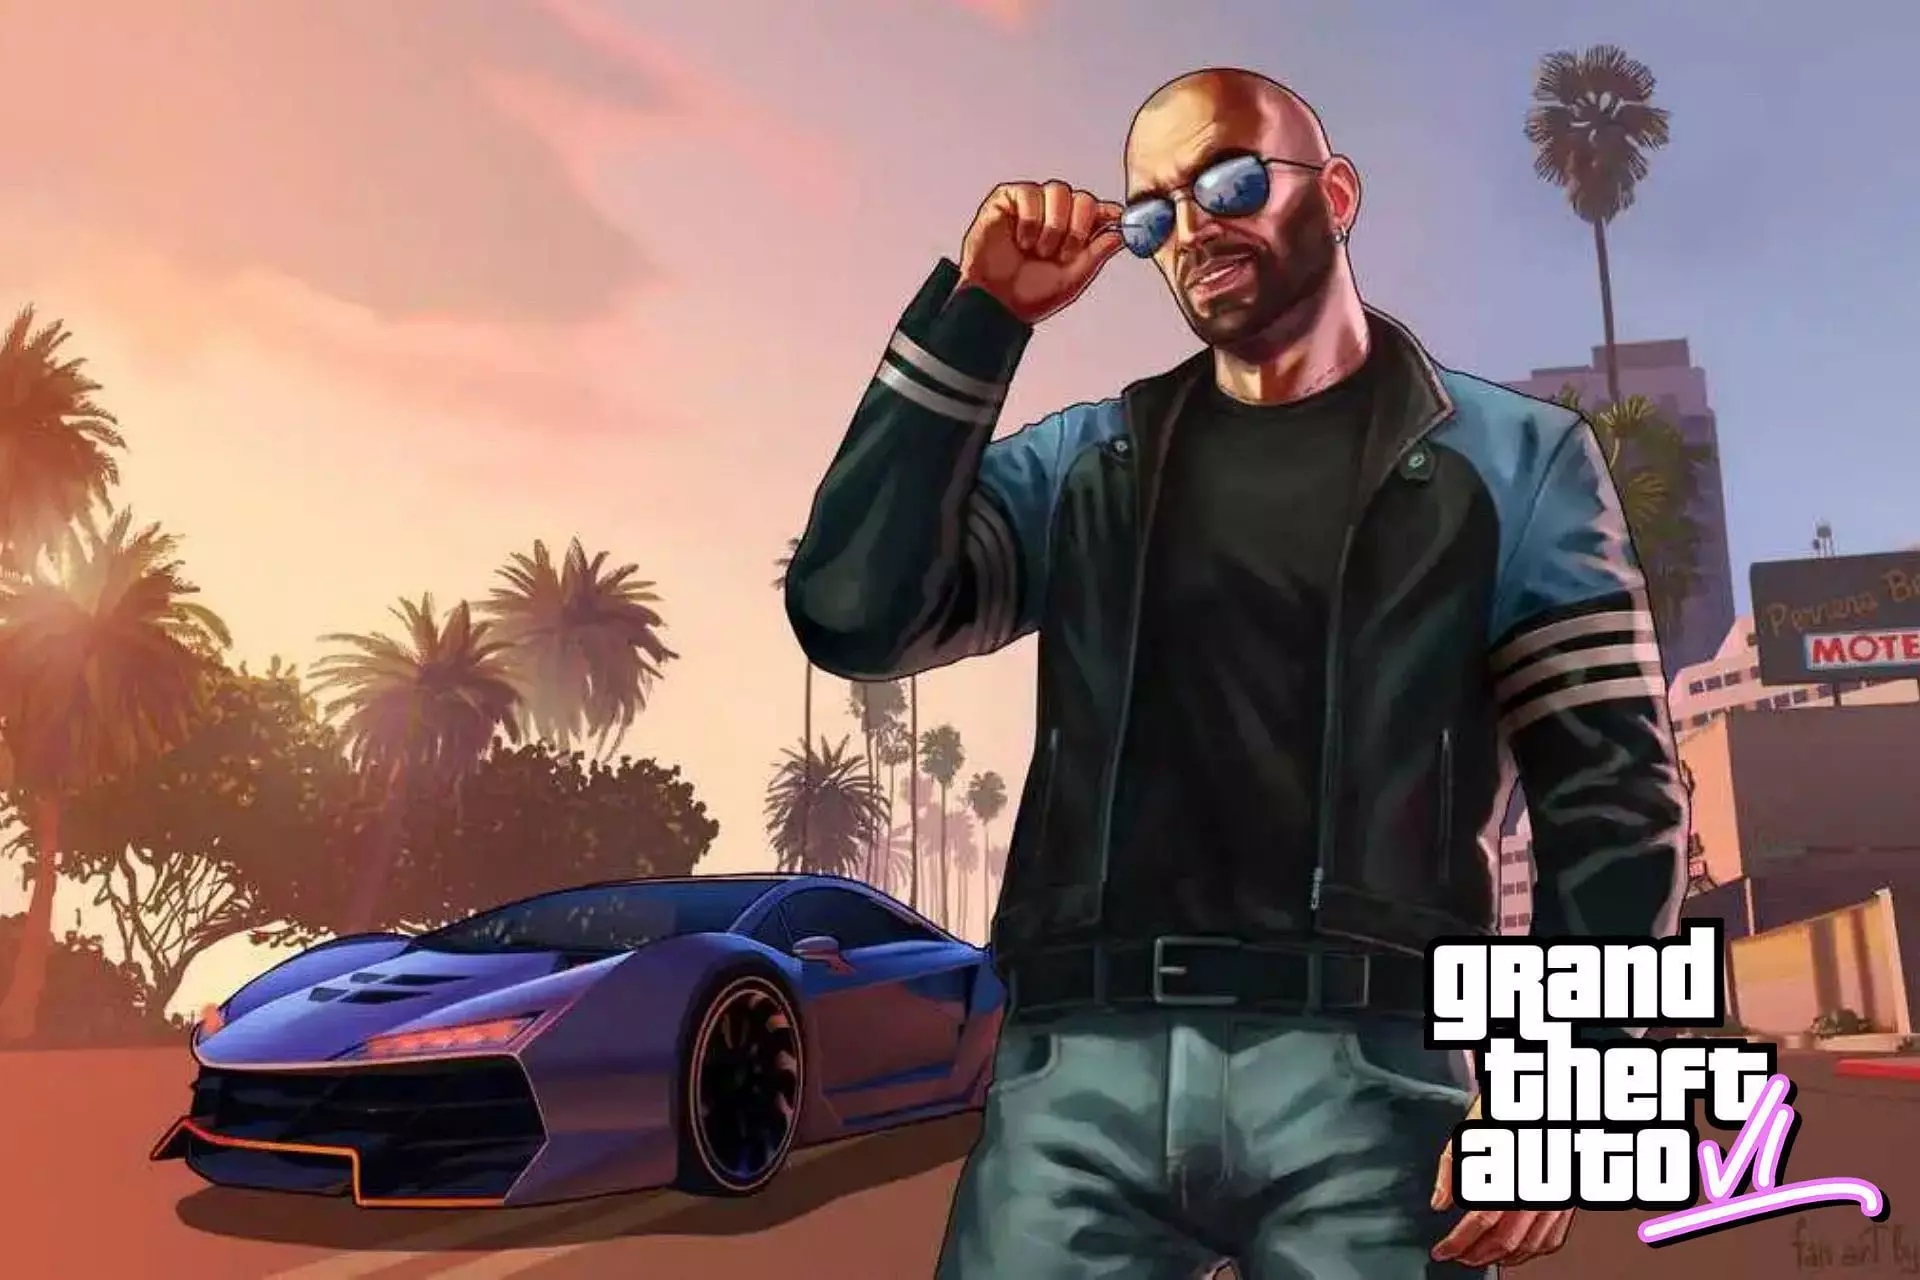 GTA 6 leaks that have come up so far